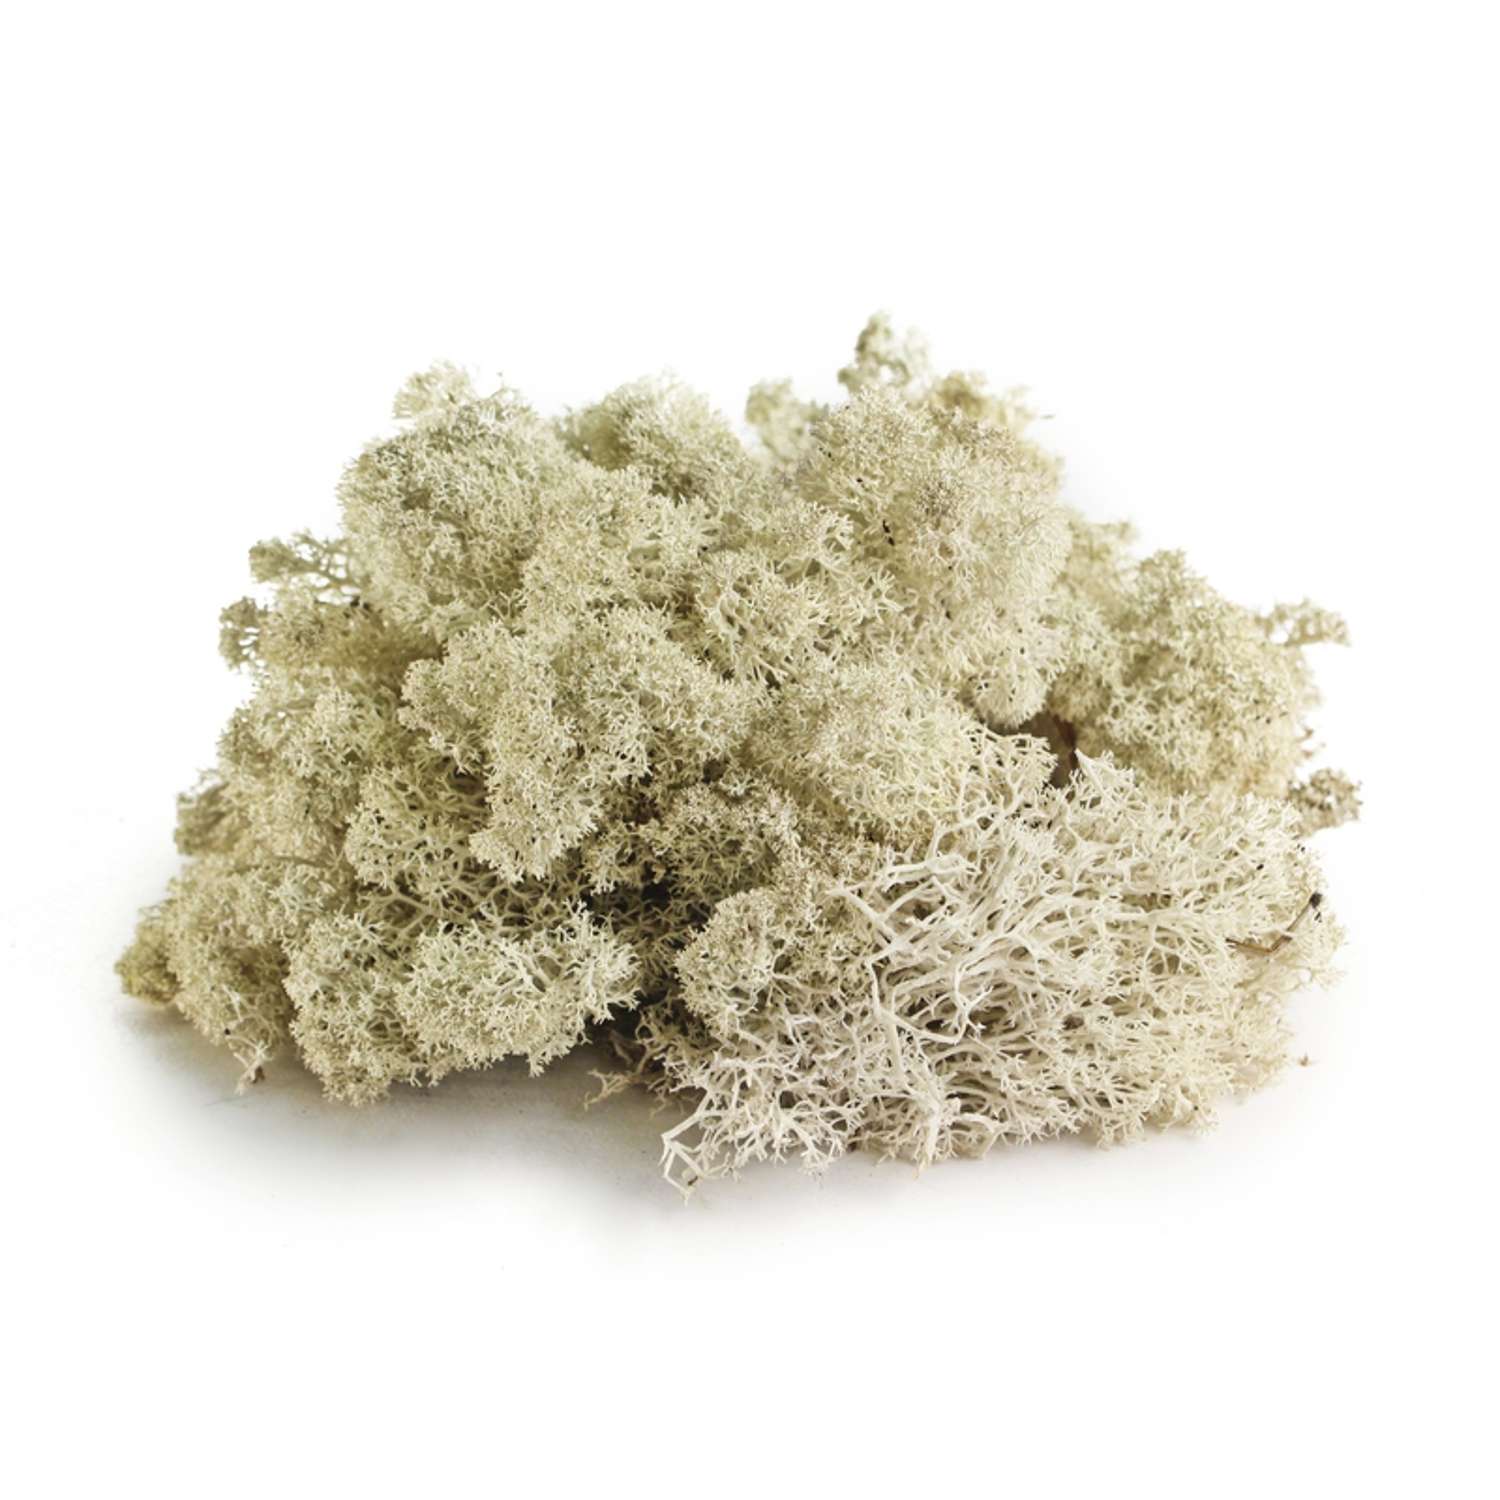 What is Reindeer Moss? - A-Z Animals